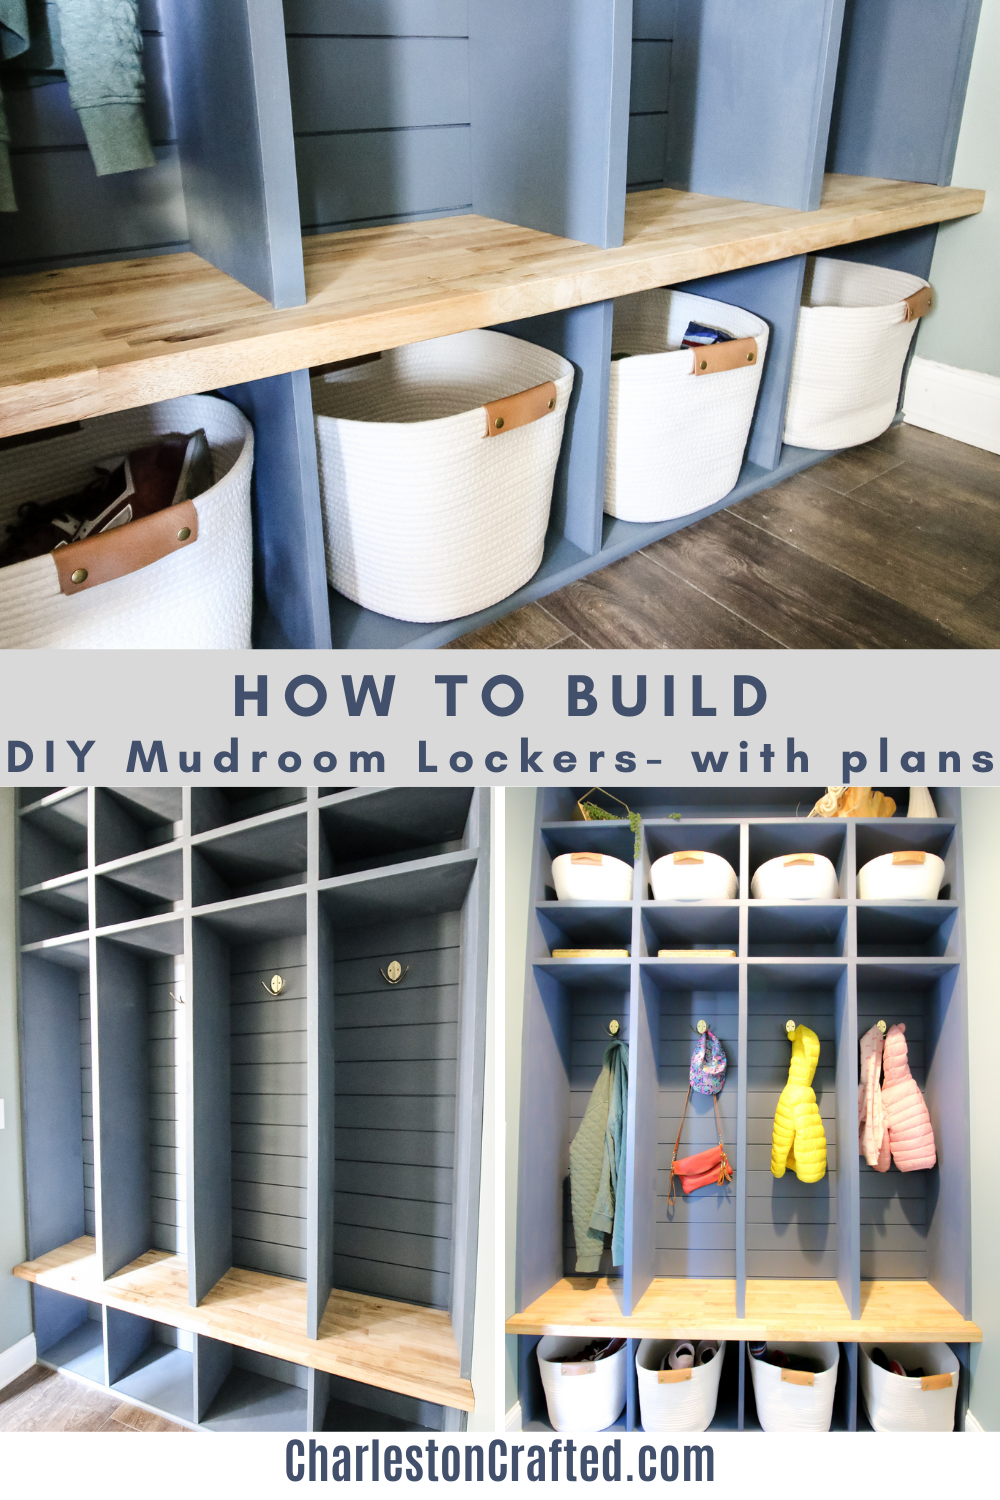 https://www.charlestoncrafted.com/wp-content/uploads/2022/01/How-to-build-DIY-mudroom-lockers.png